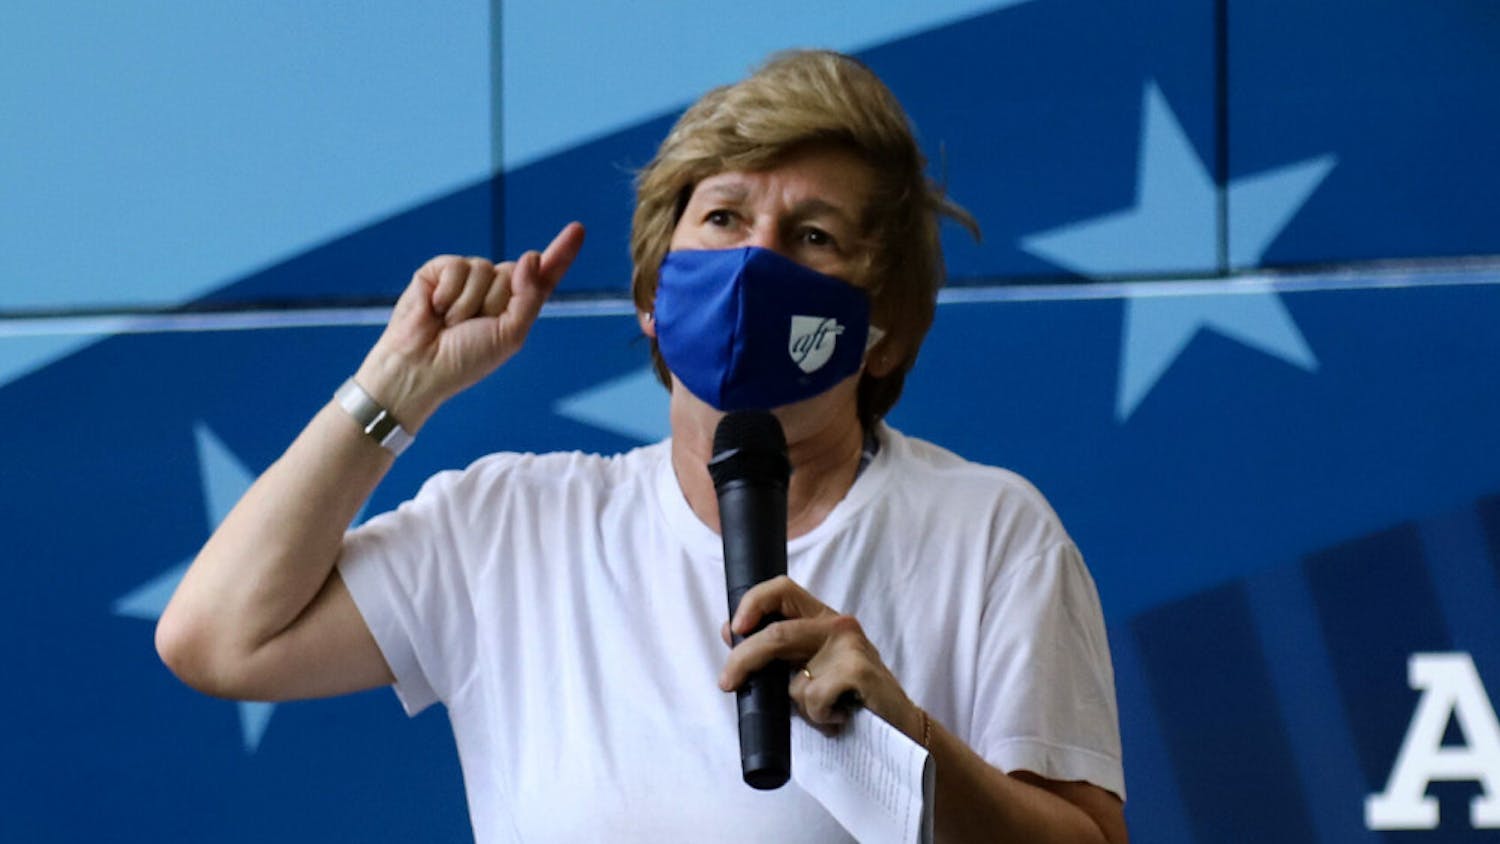 Randi Weingarten, the president of the American Federation of Teachers, speaks about education budgets at an early voting rally hosted by AFT on Thursday, Oct. 29, 2020, at the First United Methodist Church.&nbsp;